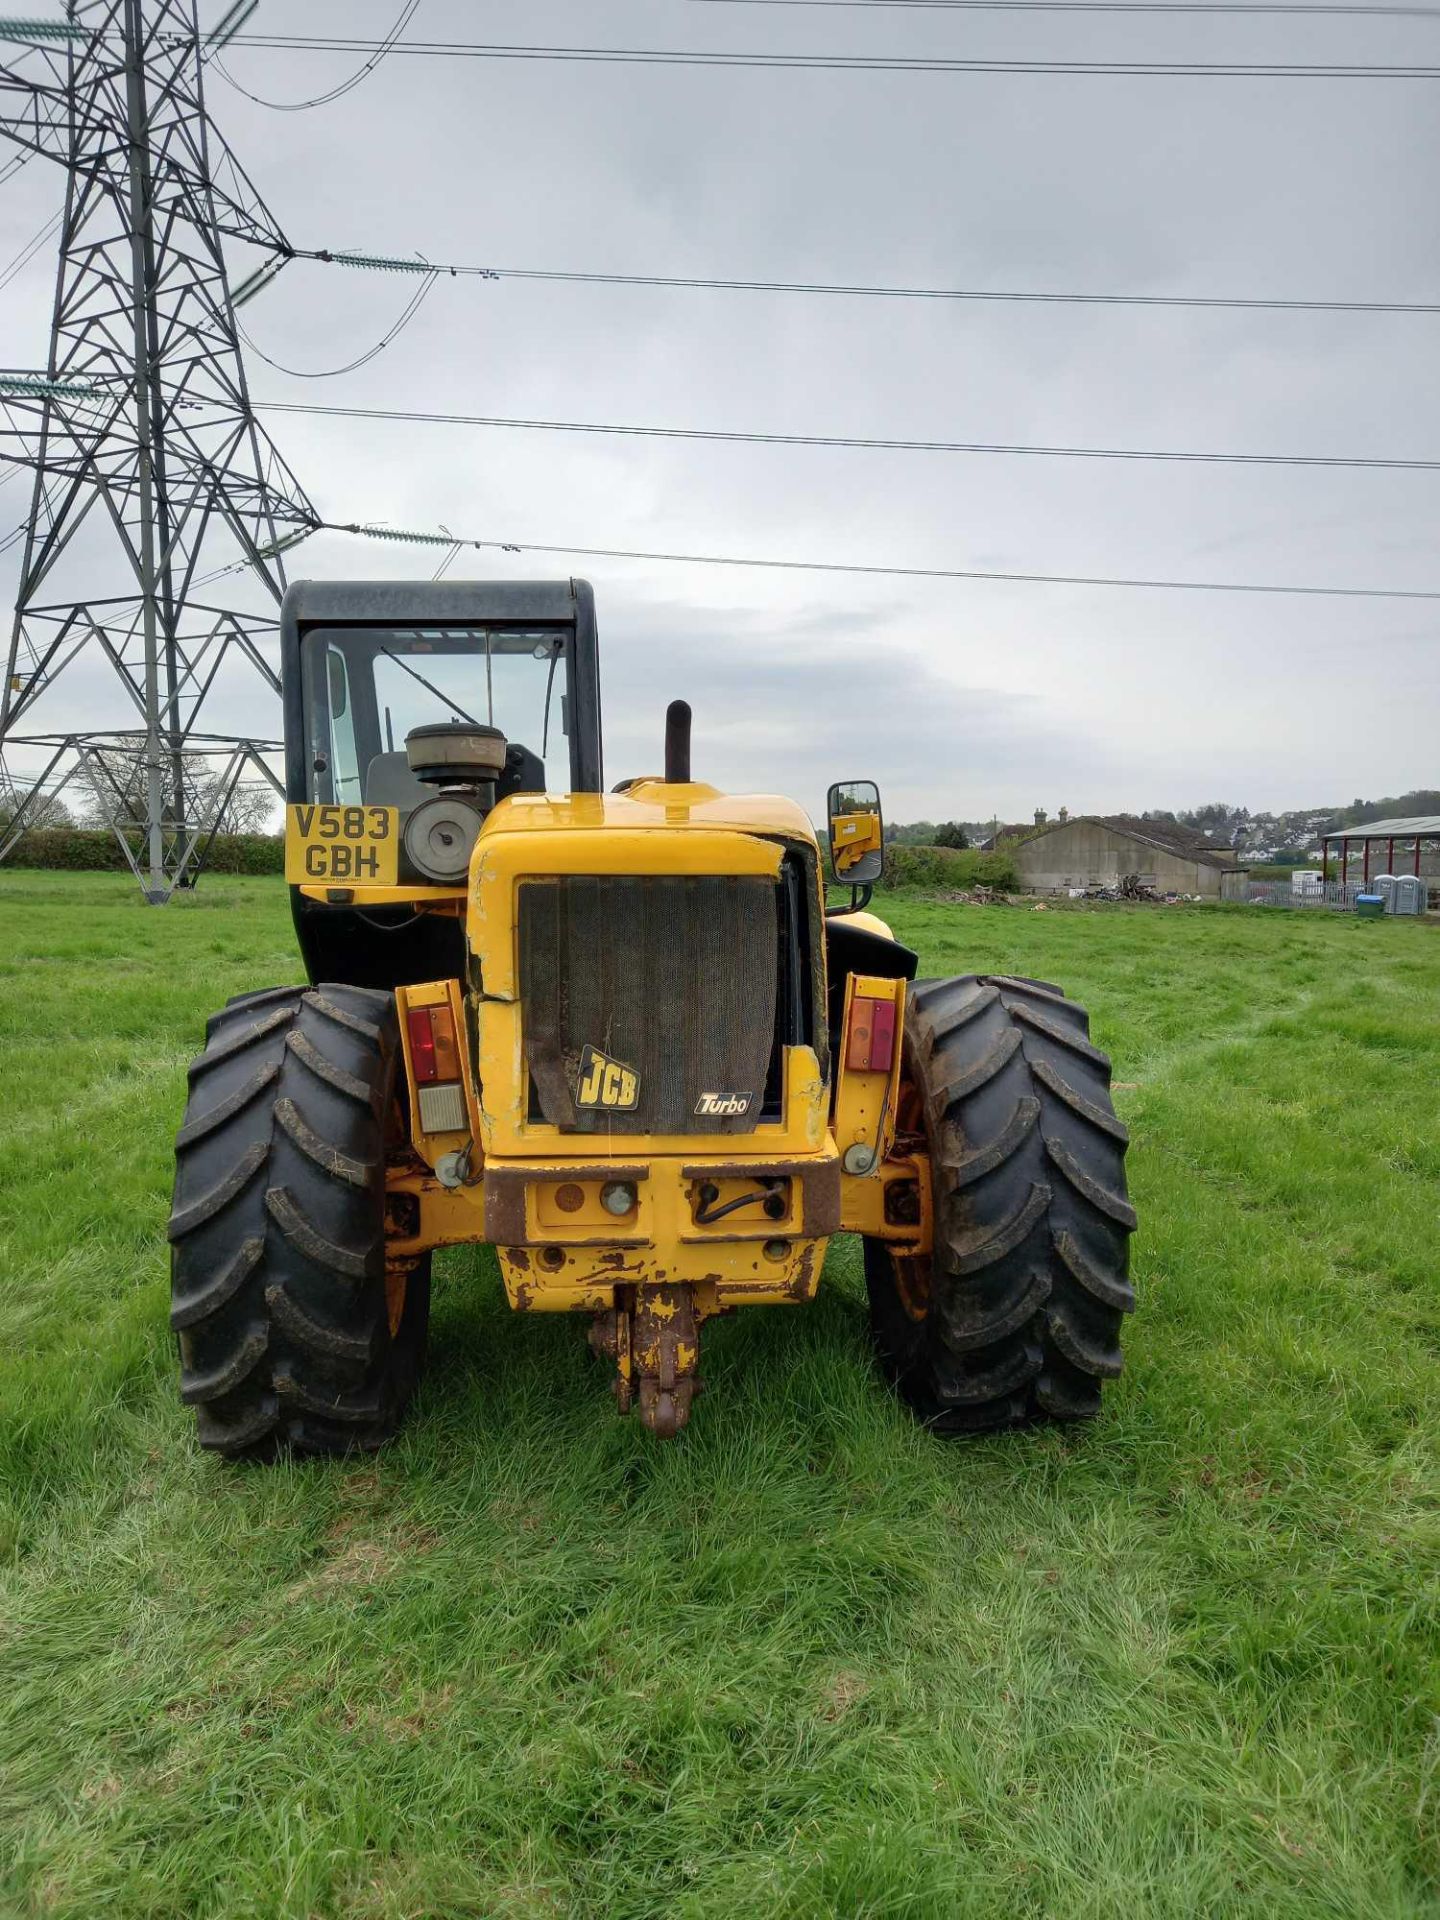 1999 JCB 526S Farm Special Loadall, hydraulic hitch, with pallet tines. Reg: V583 GBH. Hours: 8,080. - Image 5 of 5